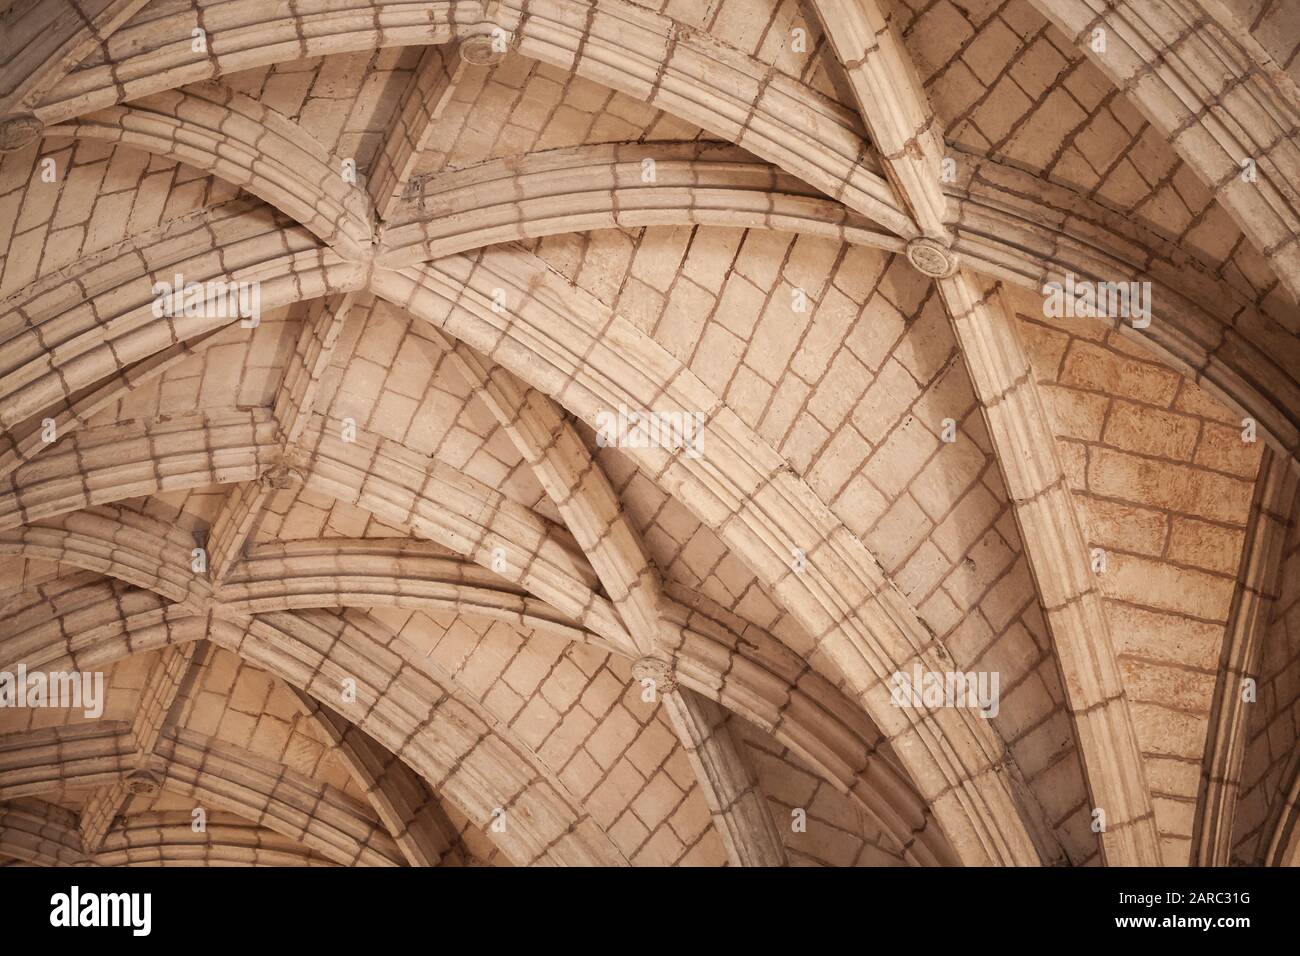 Arched Gothic vault structure, abstract classic architectural background photo Stock Photo